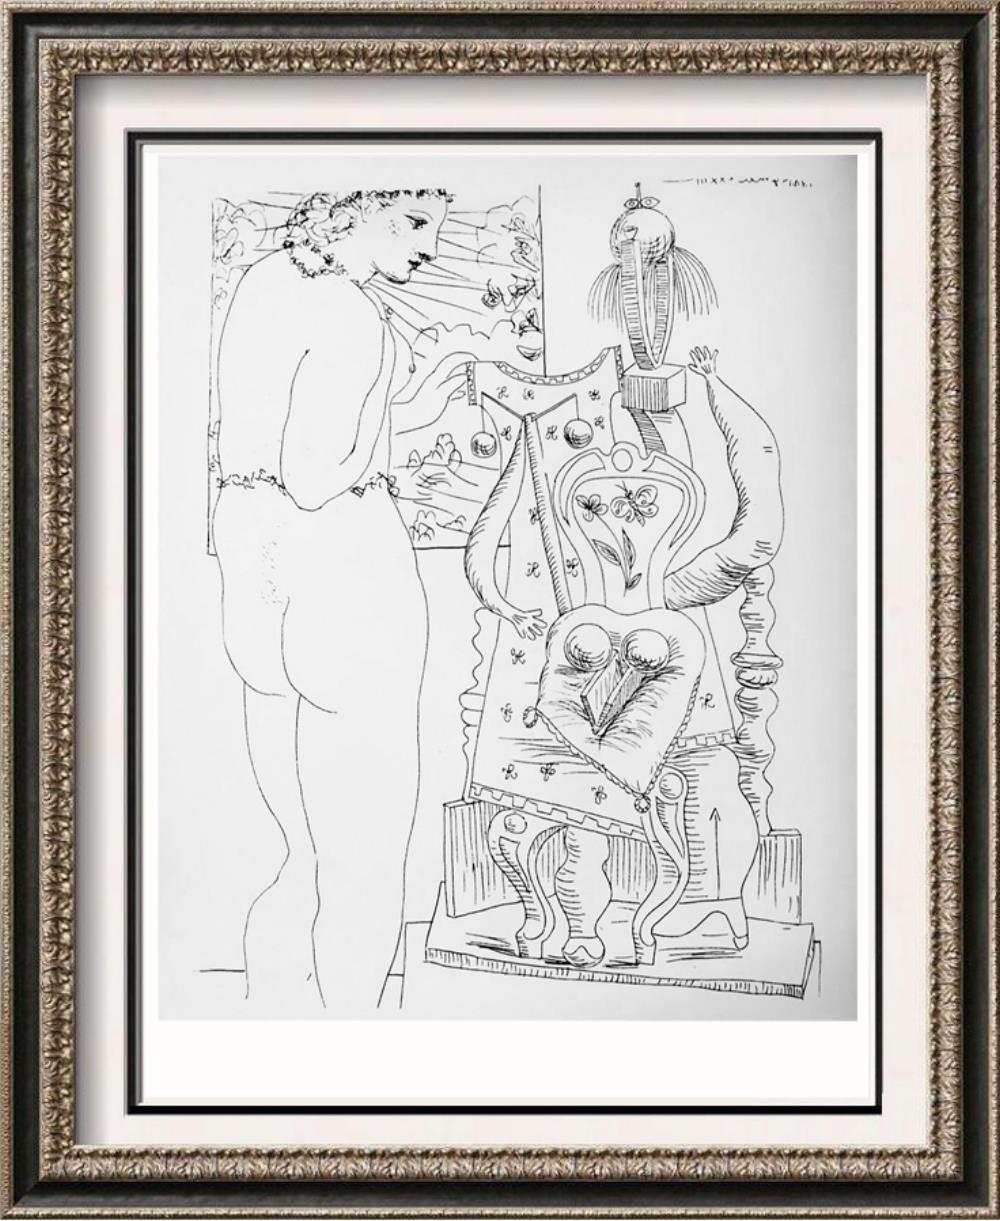 Pablo Picasso Nude and Sculpture c. 1933 Fine Art Print from Museum Artist